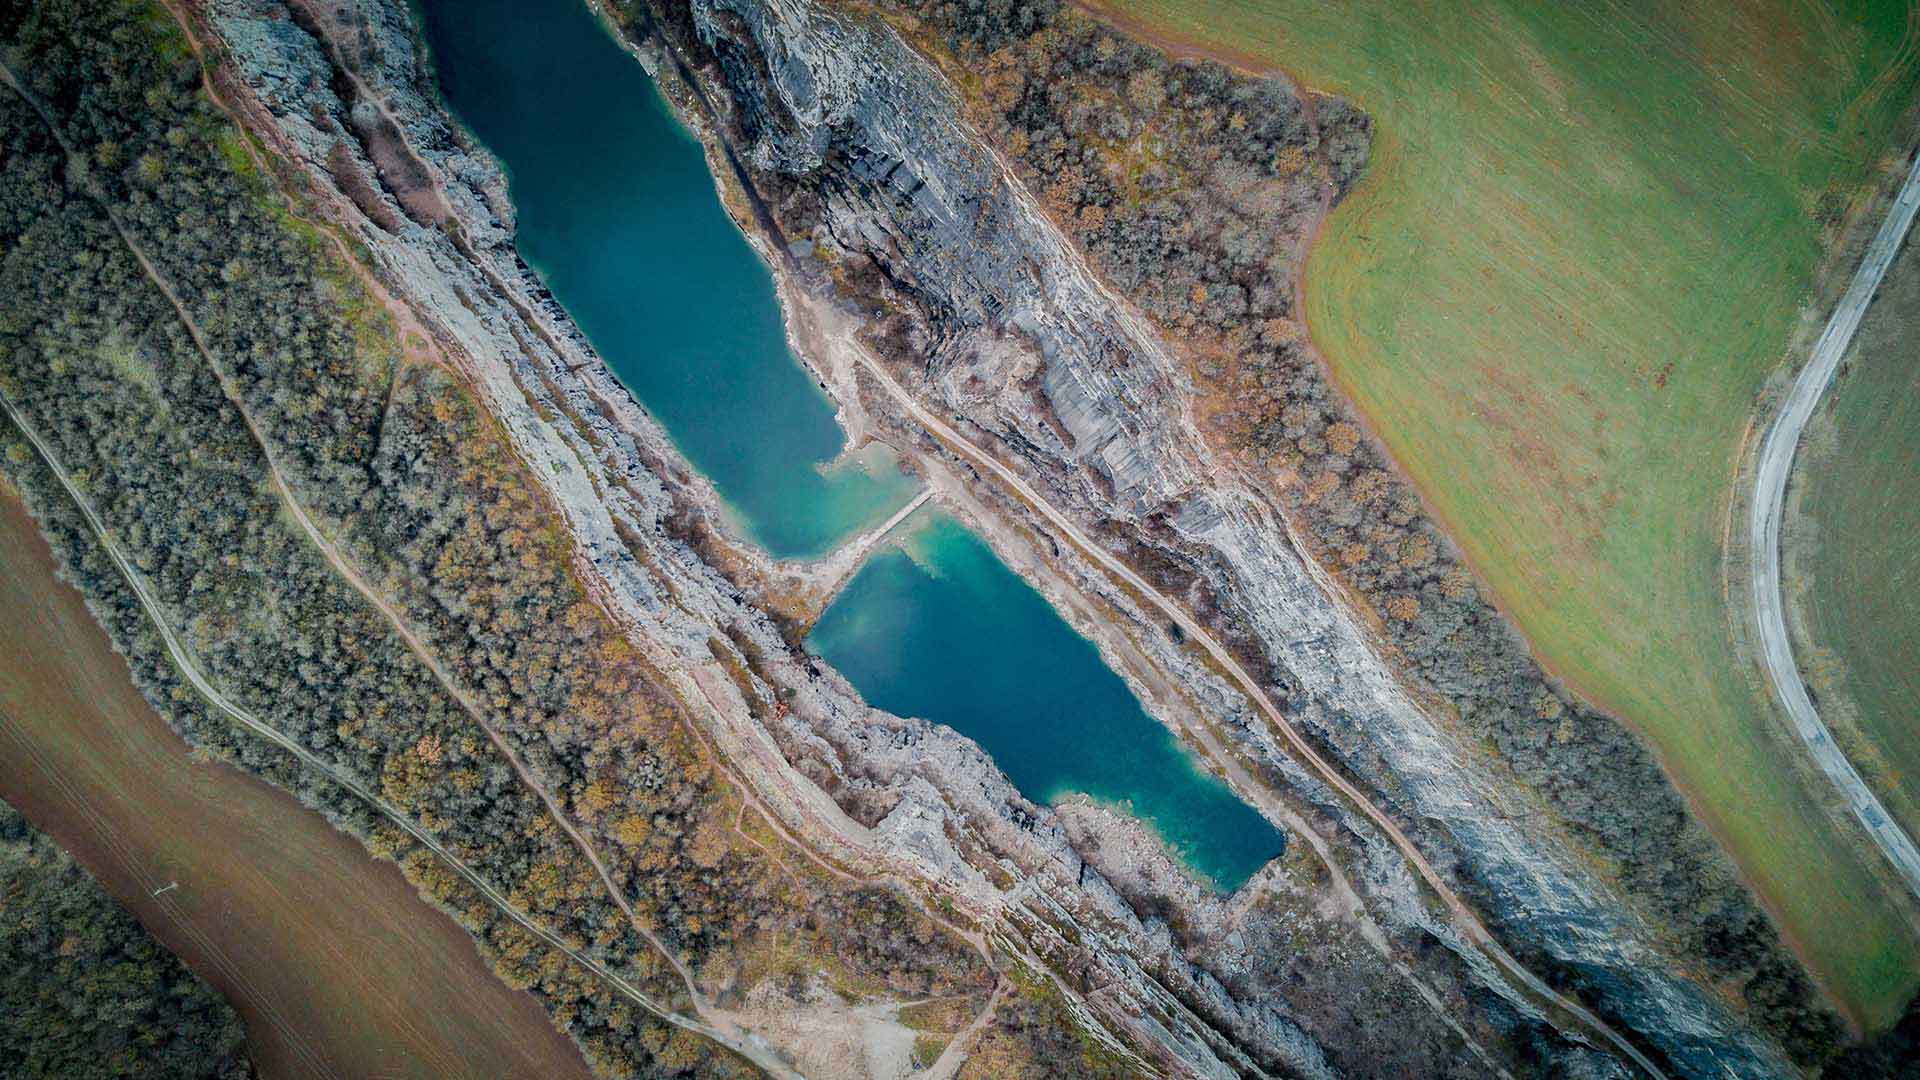 This quarry with its retention pool is an example of a natural resources company's work